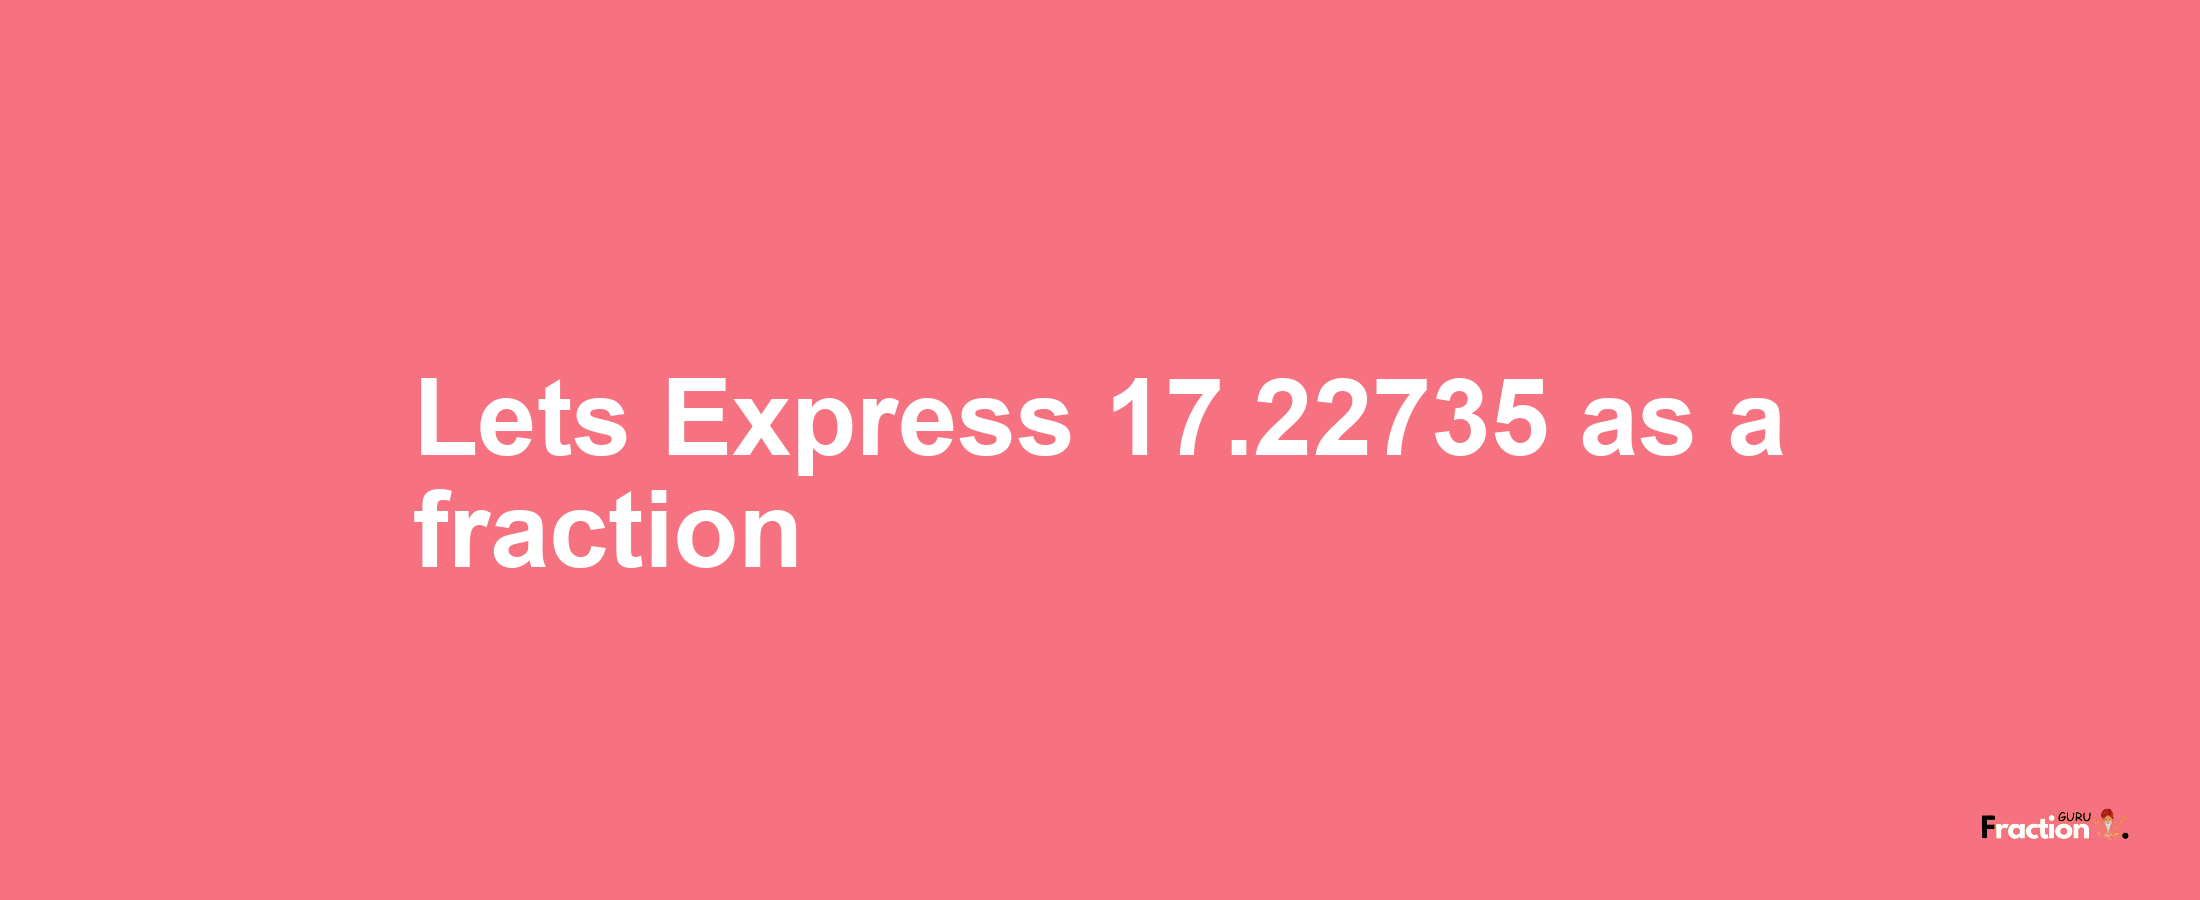 Lets Express 17.22735 as afraction